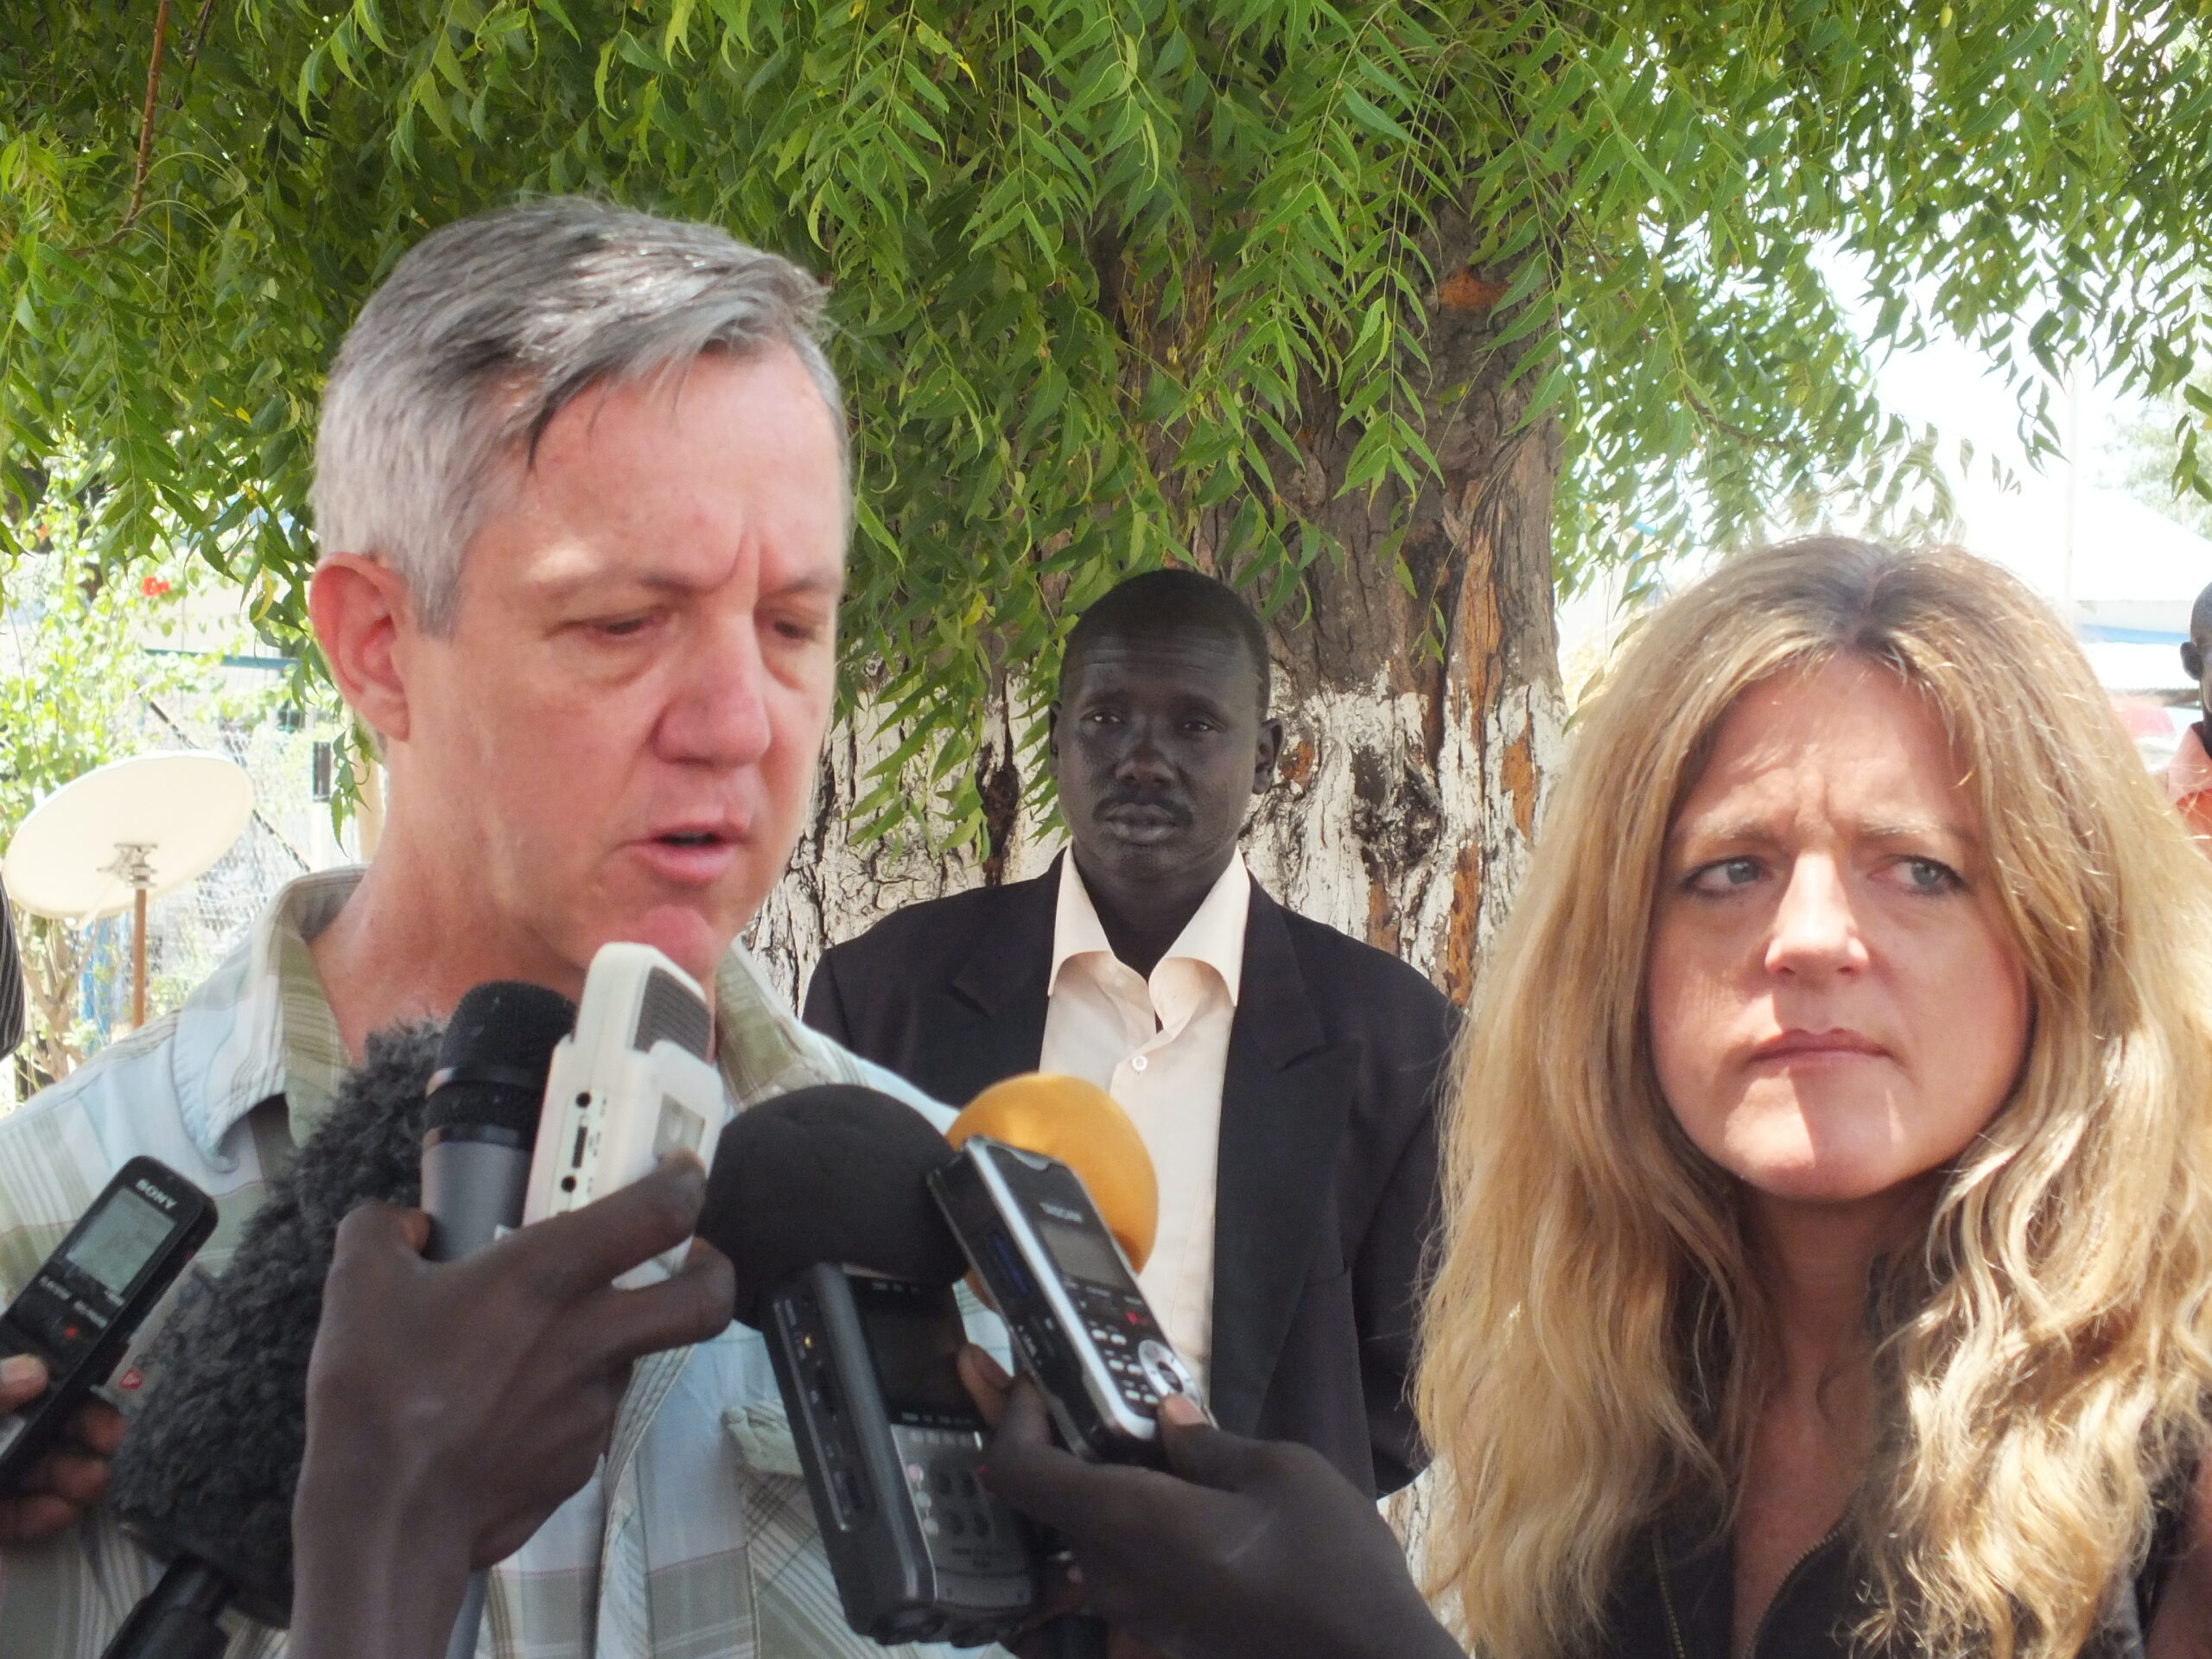 UN Assistant Secretary-General for Field Support, Anthony Banbury (L) and head of the UNMISS Hilde Johnson (R) in Bor on April 13, 2013 (ST)